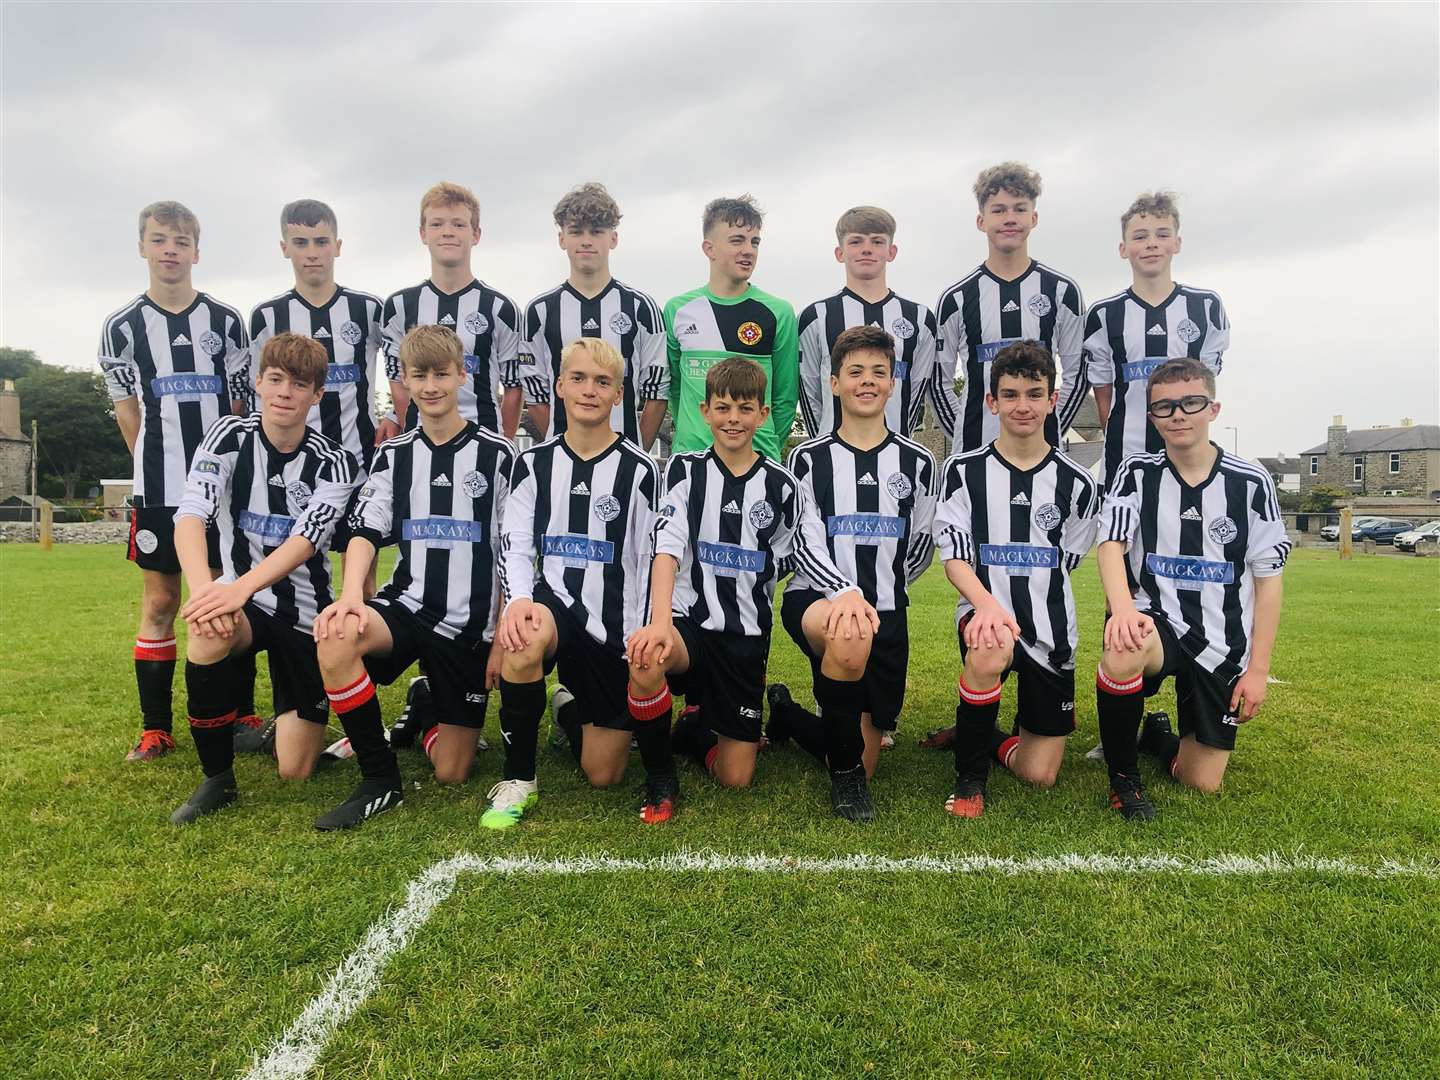 The Caithness United squad who defeated their Dingwall counterparts 6-0 in their opening match in the Highland Youth Development League.